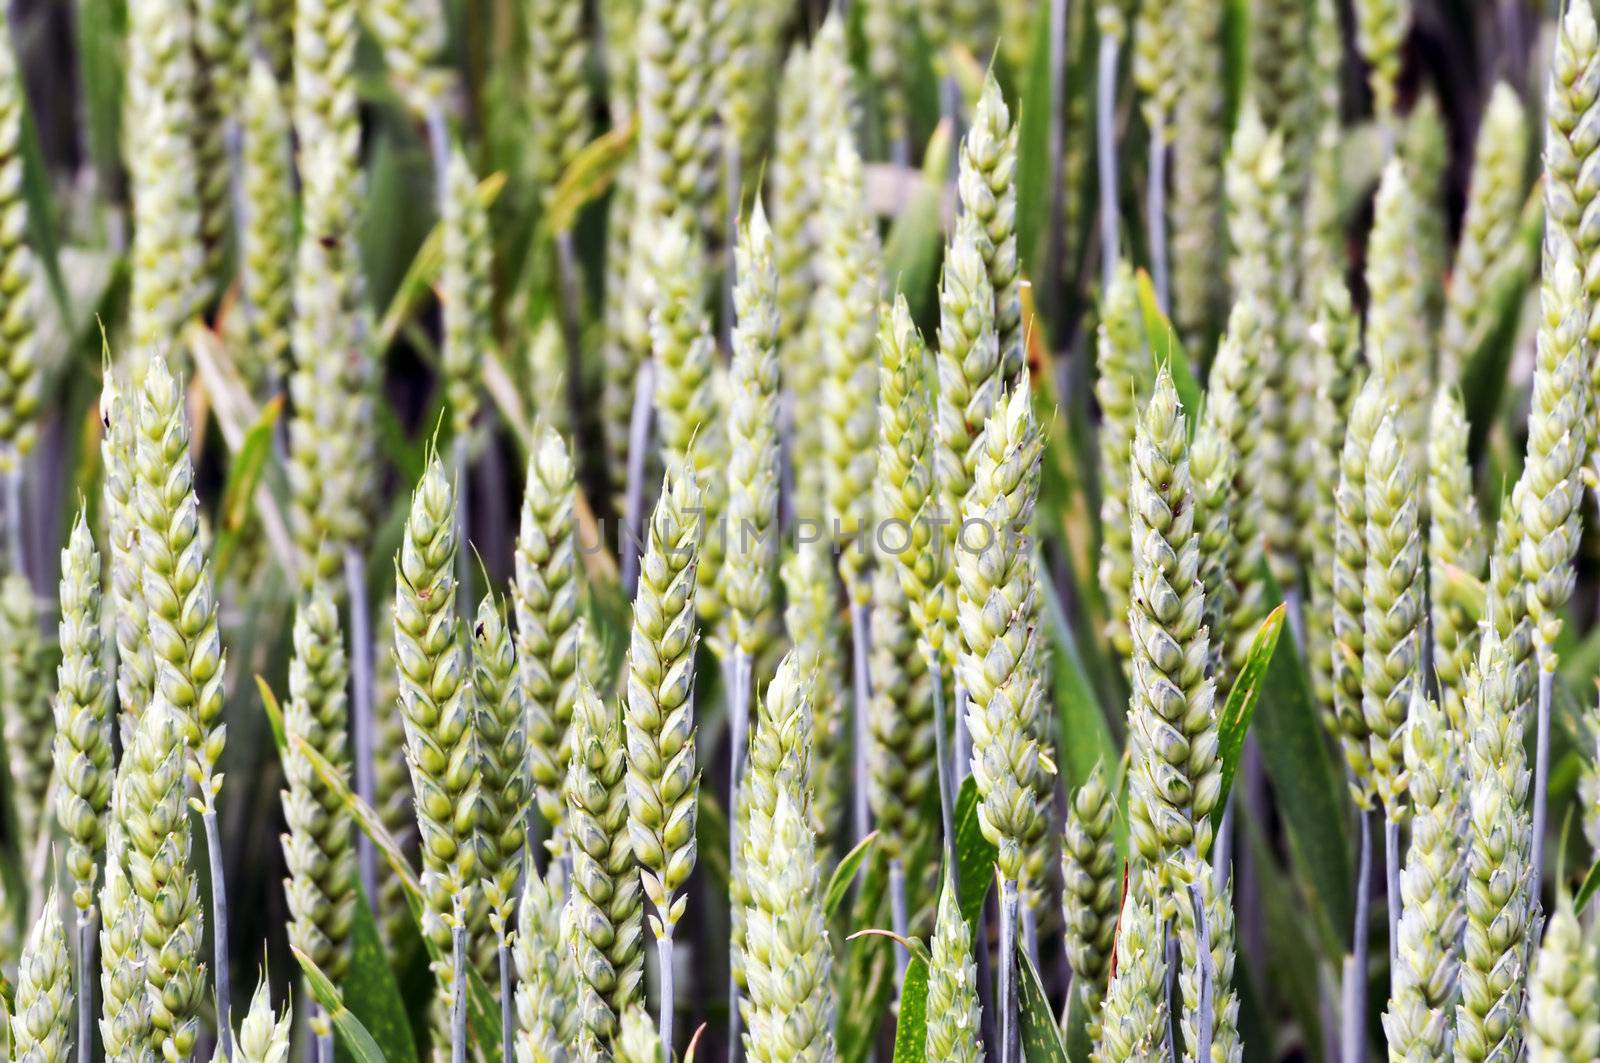 Detail of green spikes in a corn field